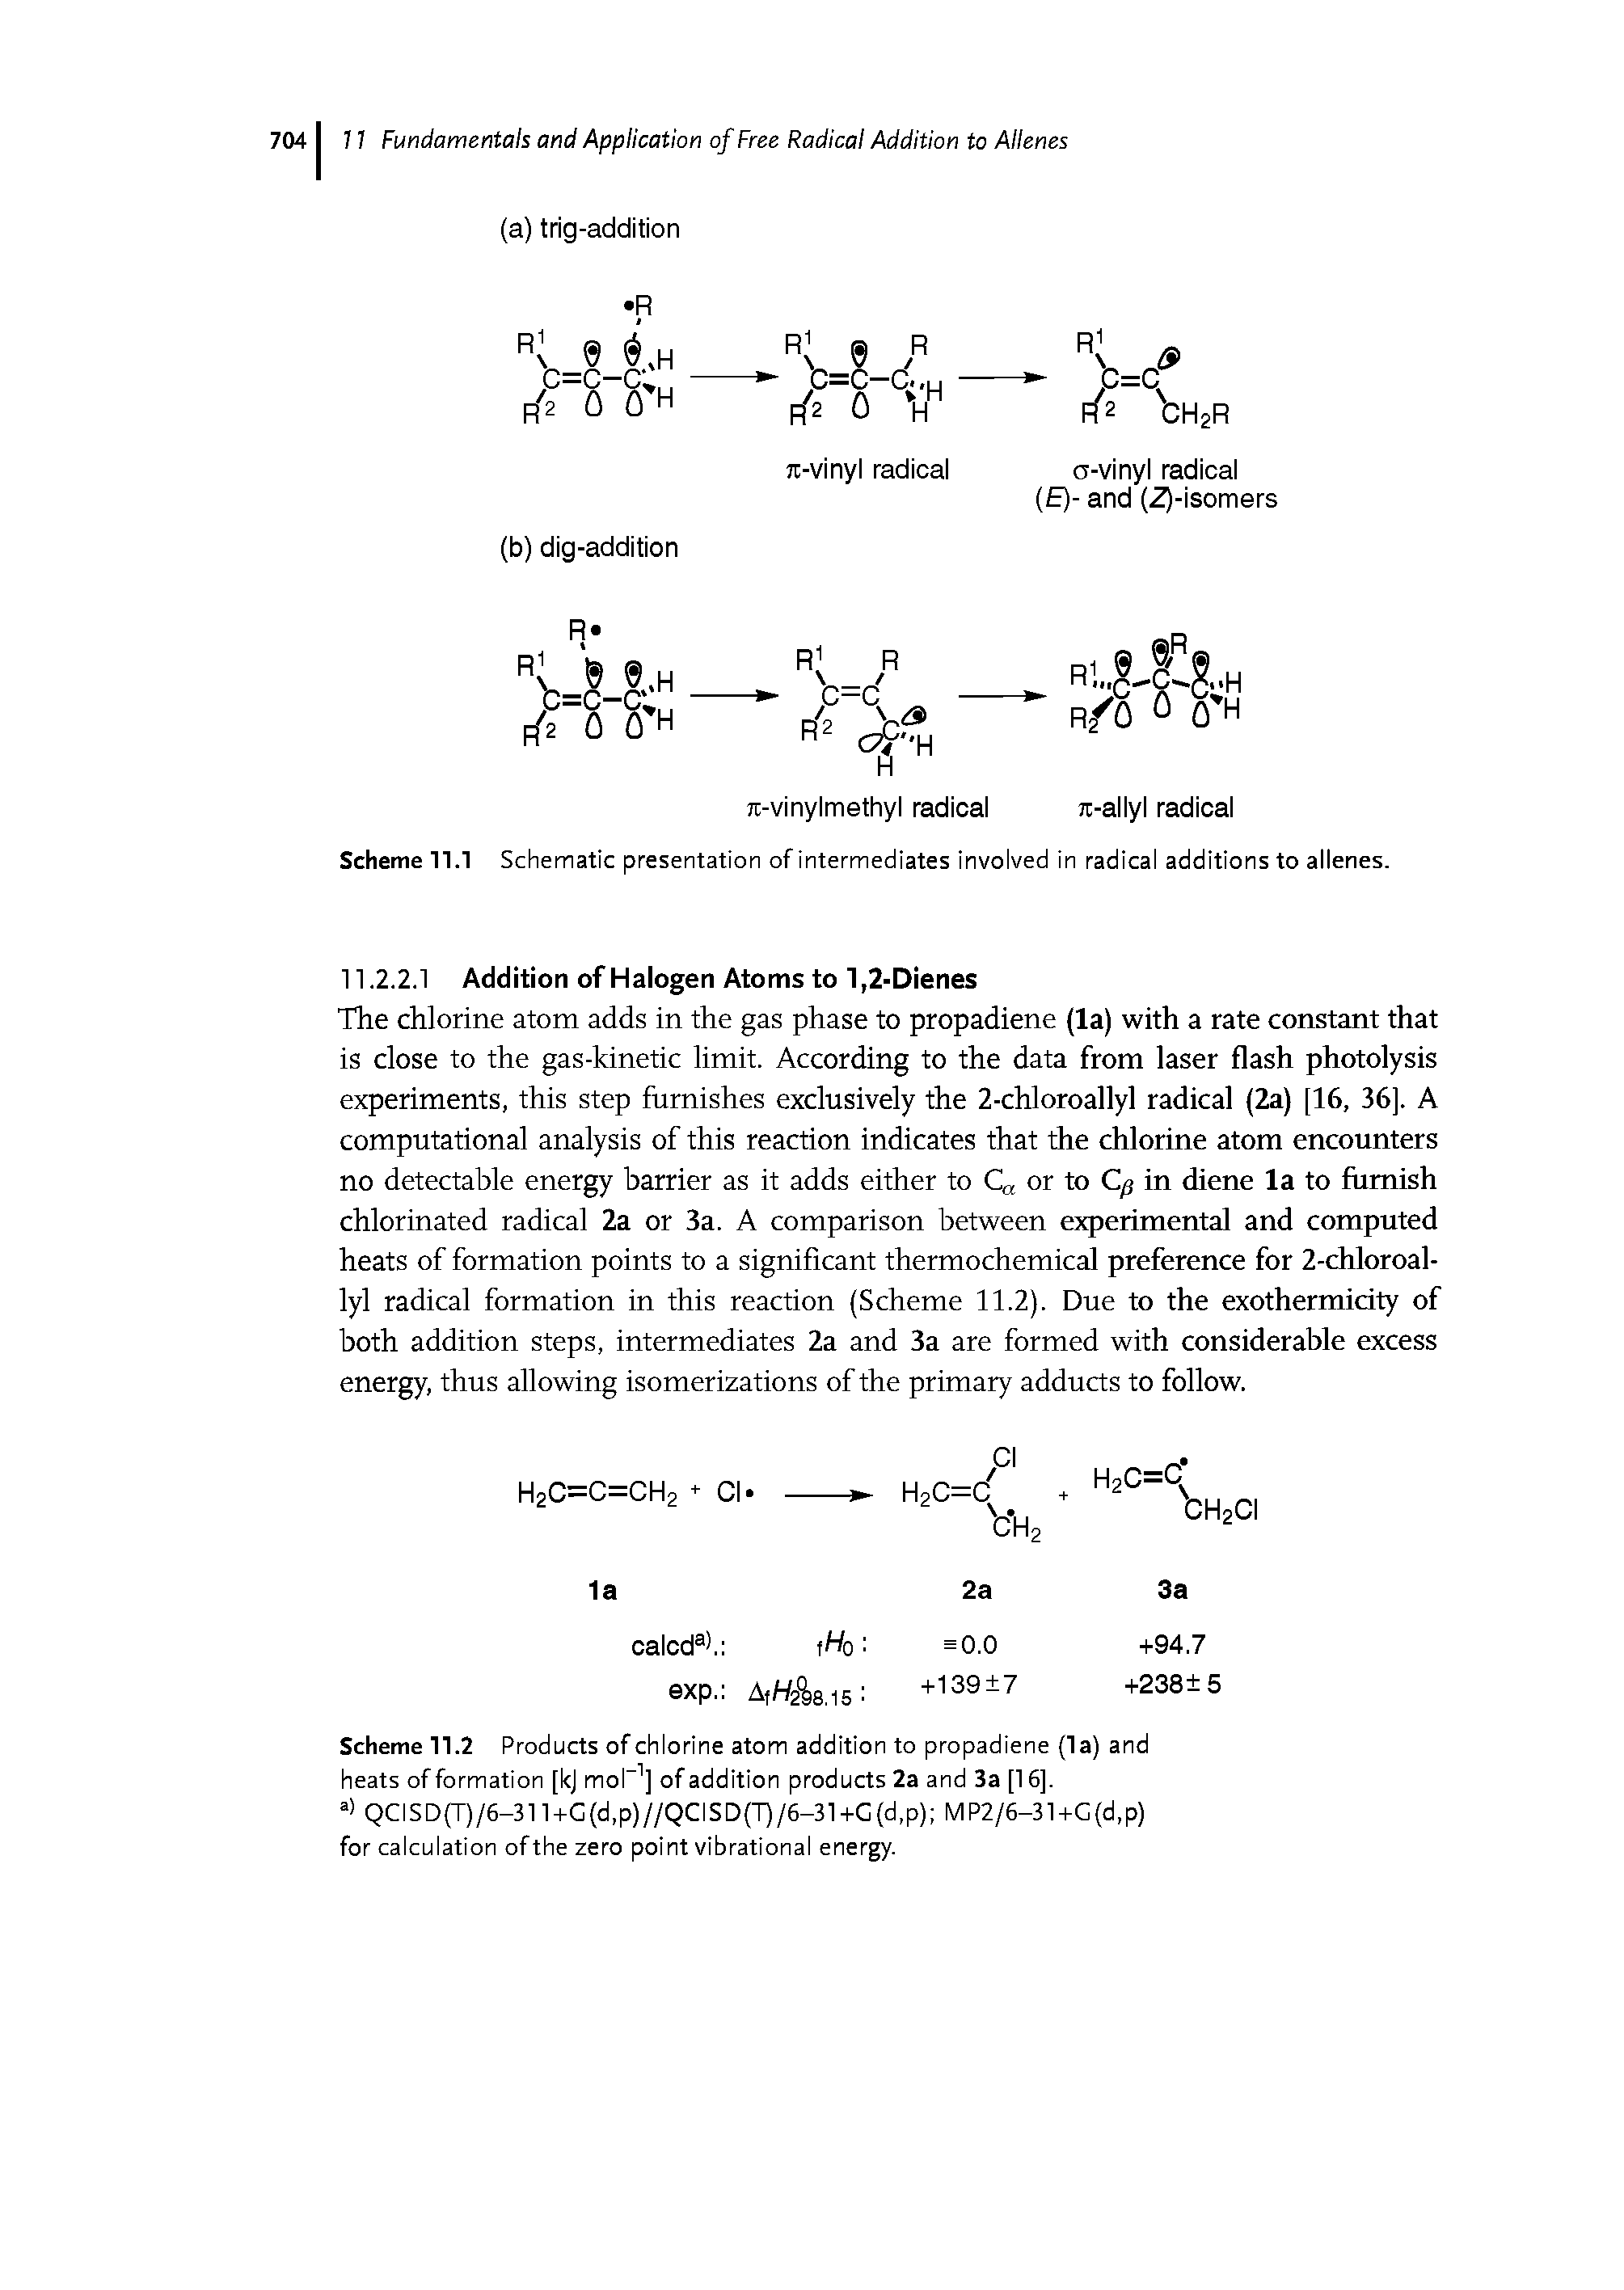 Scheme 11.2 Products of chlorine atom addition to propadiene (la) and heats of formation [kj mol-1] of addition products 2a and 3a [16], a> QCISD(T)/6—311+G(d,p)//QCISD(T)/6—31+G(d,p) MP2/6-31+G(d,p) for calculation of the zero point vibrational energy.